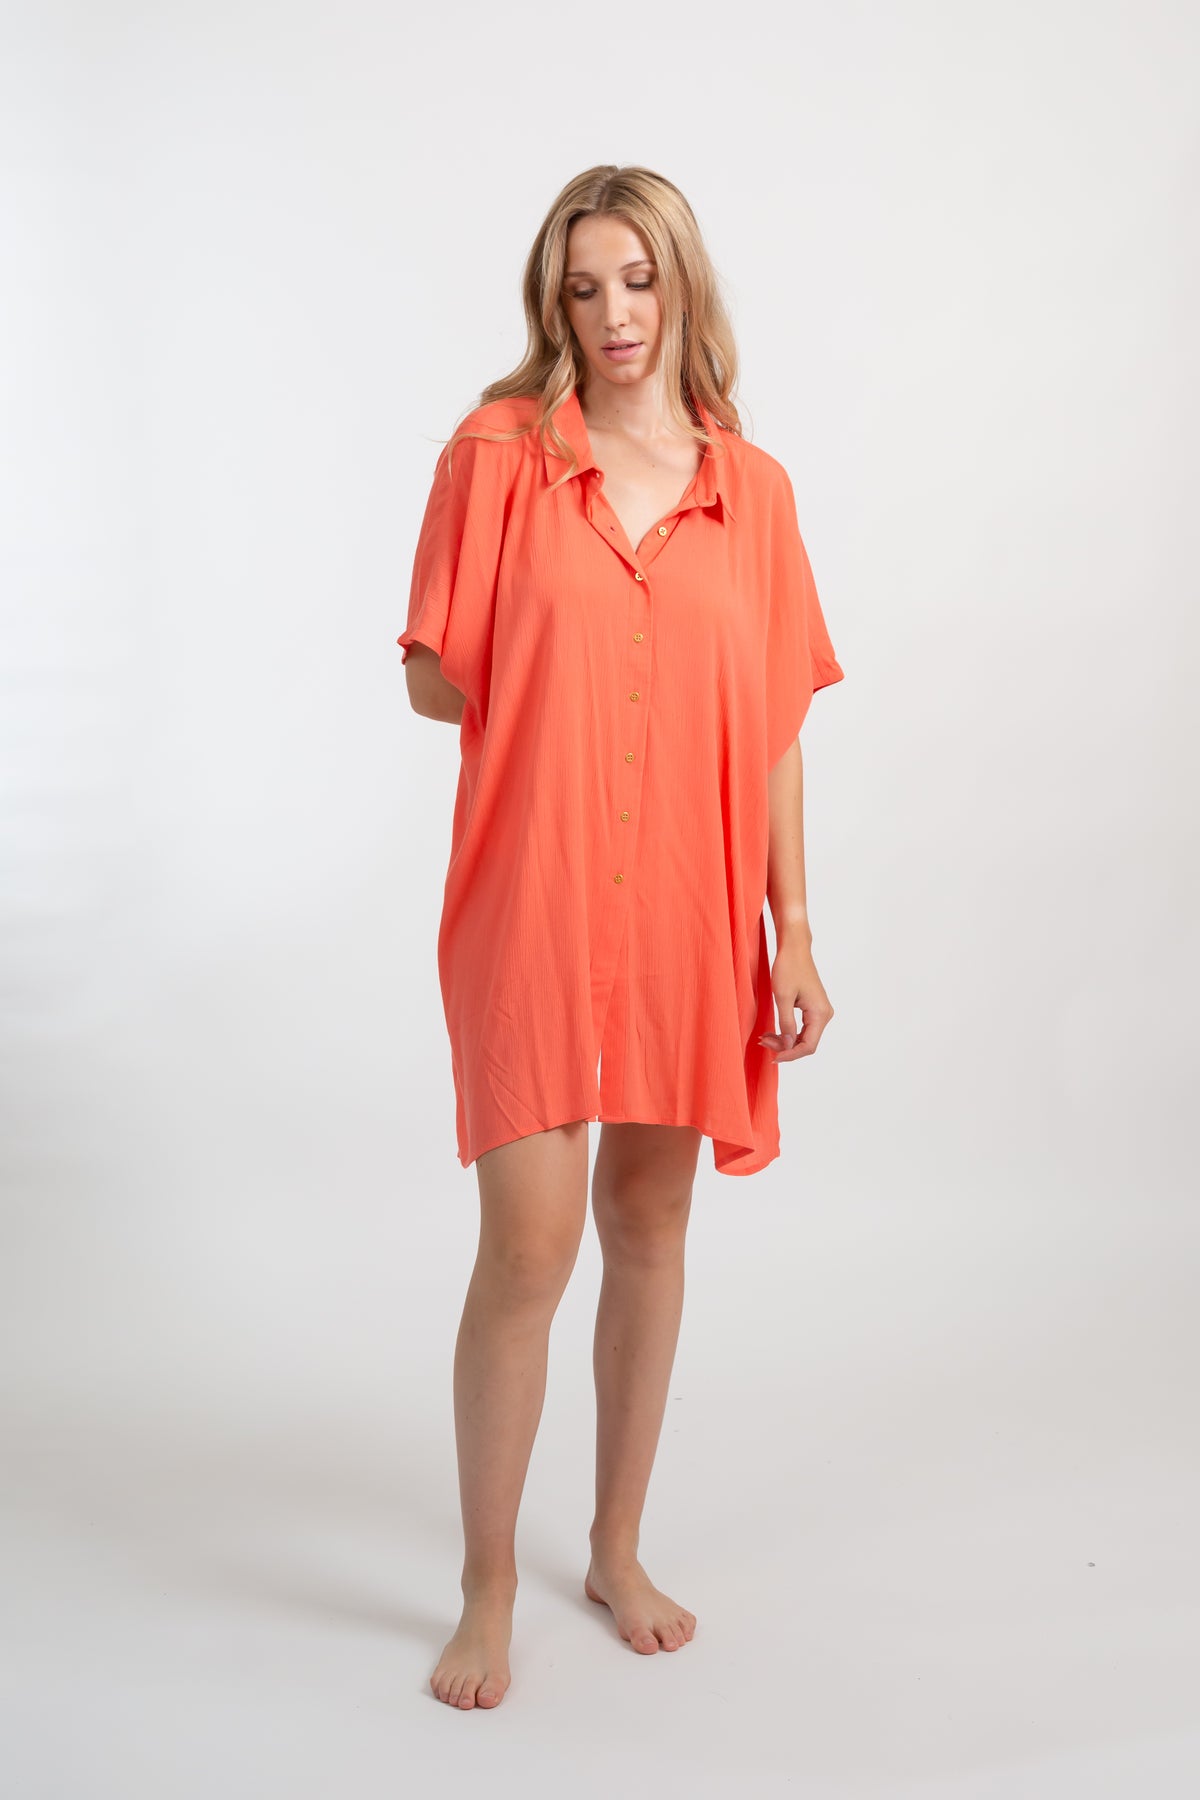 A blonde Caucasian model wearing a orange coral colored in "punch"  big shirt bathing suit cover up shirt dress, standing in a studio.